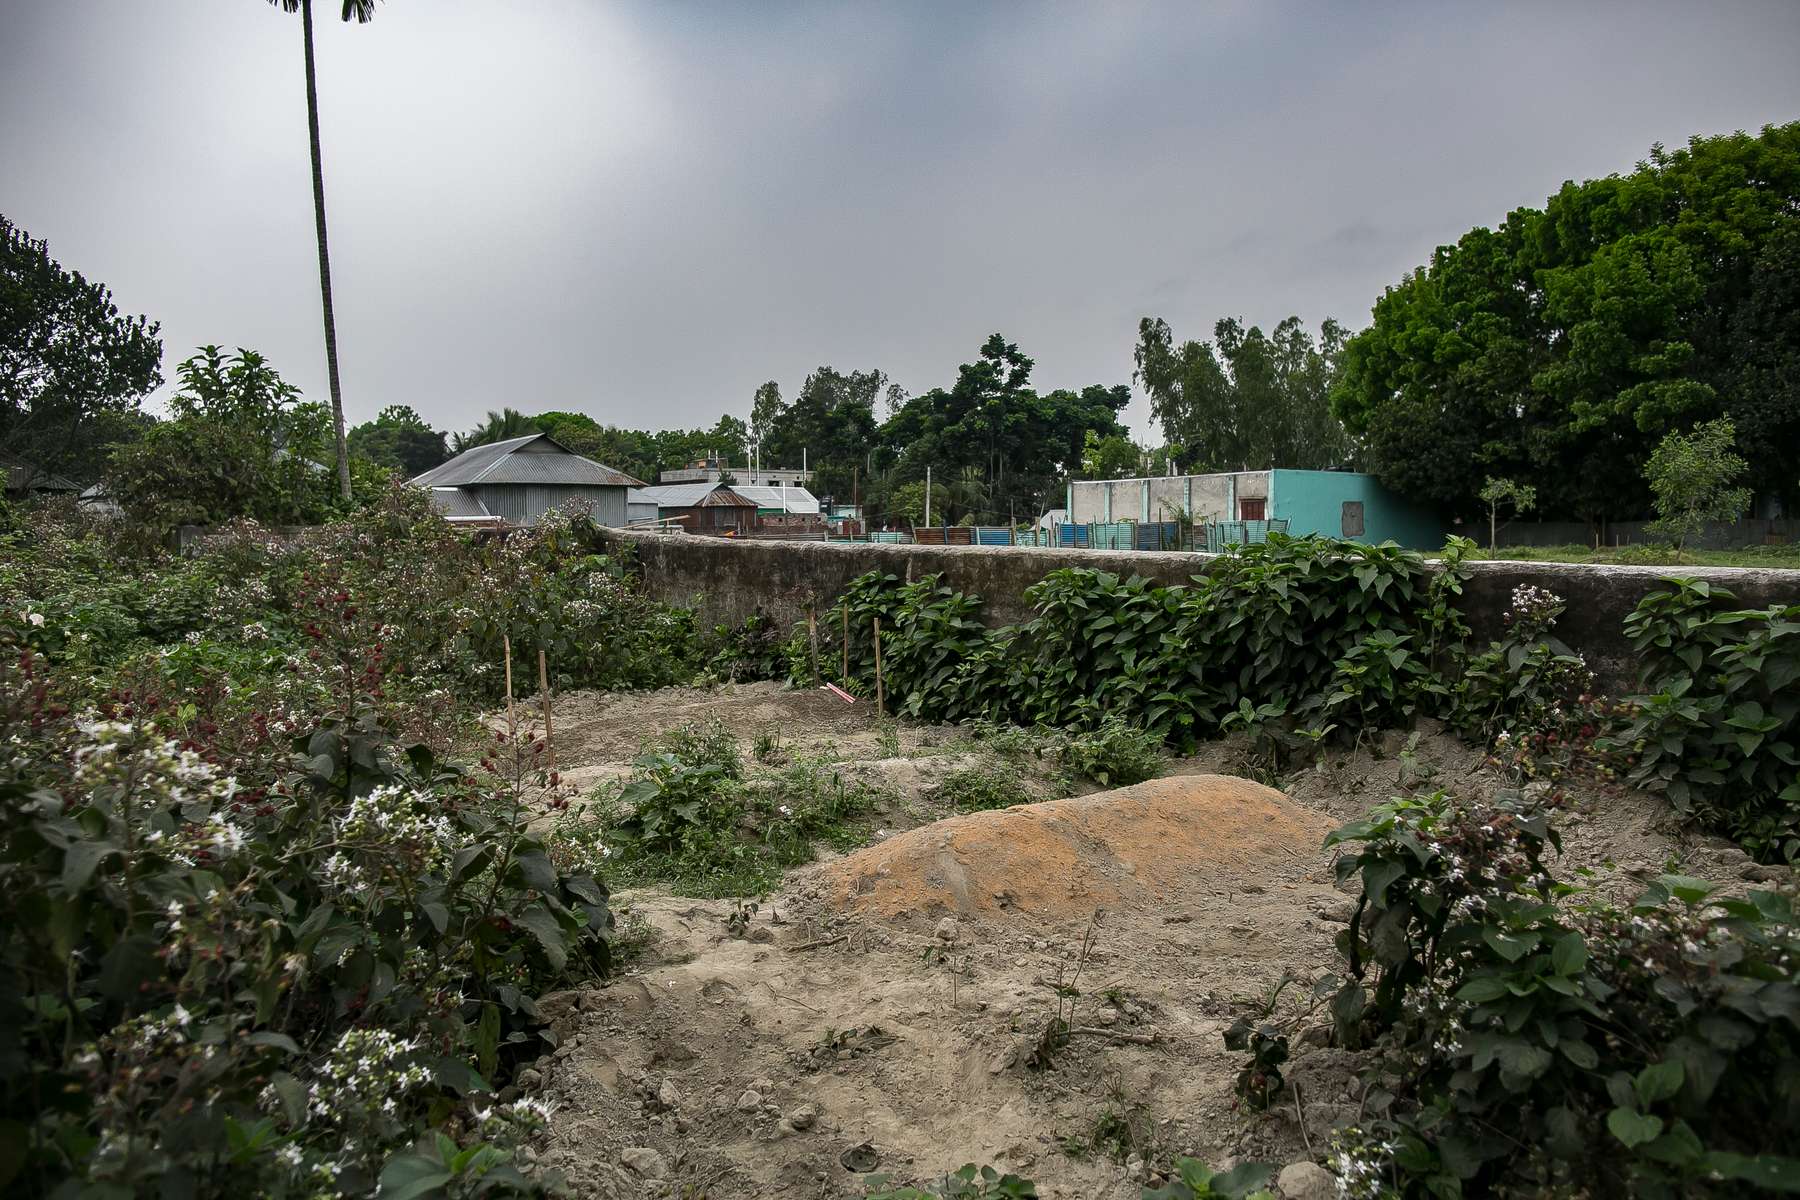 A graveyard for sex workers is seen in Tangail, Bangladesh. Women who work in the brothel are not permitted to be buried in the town's graveyard.